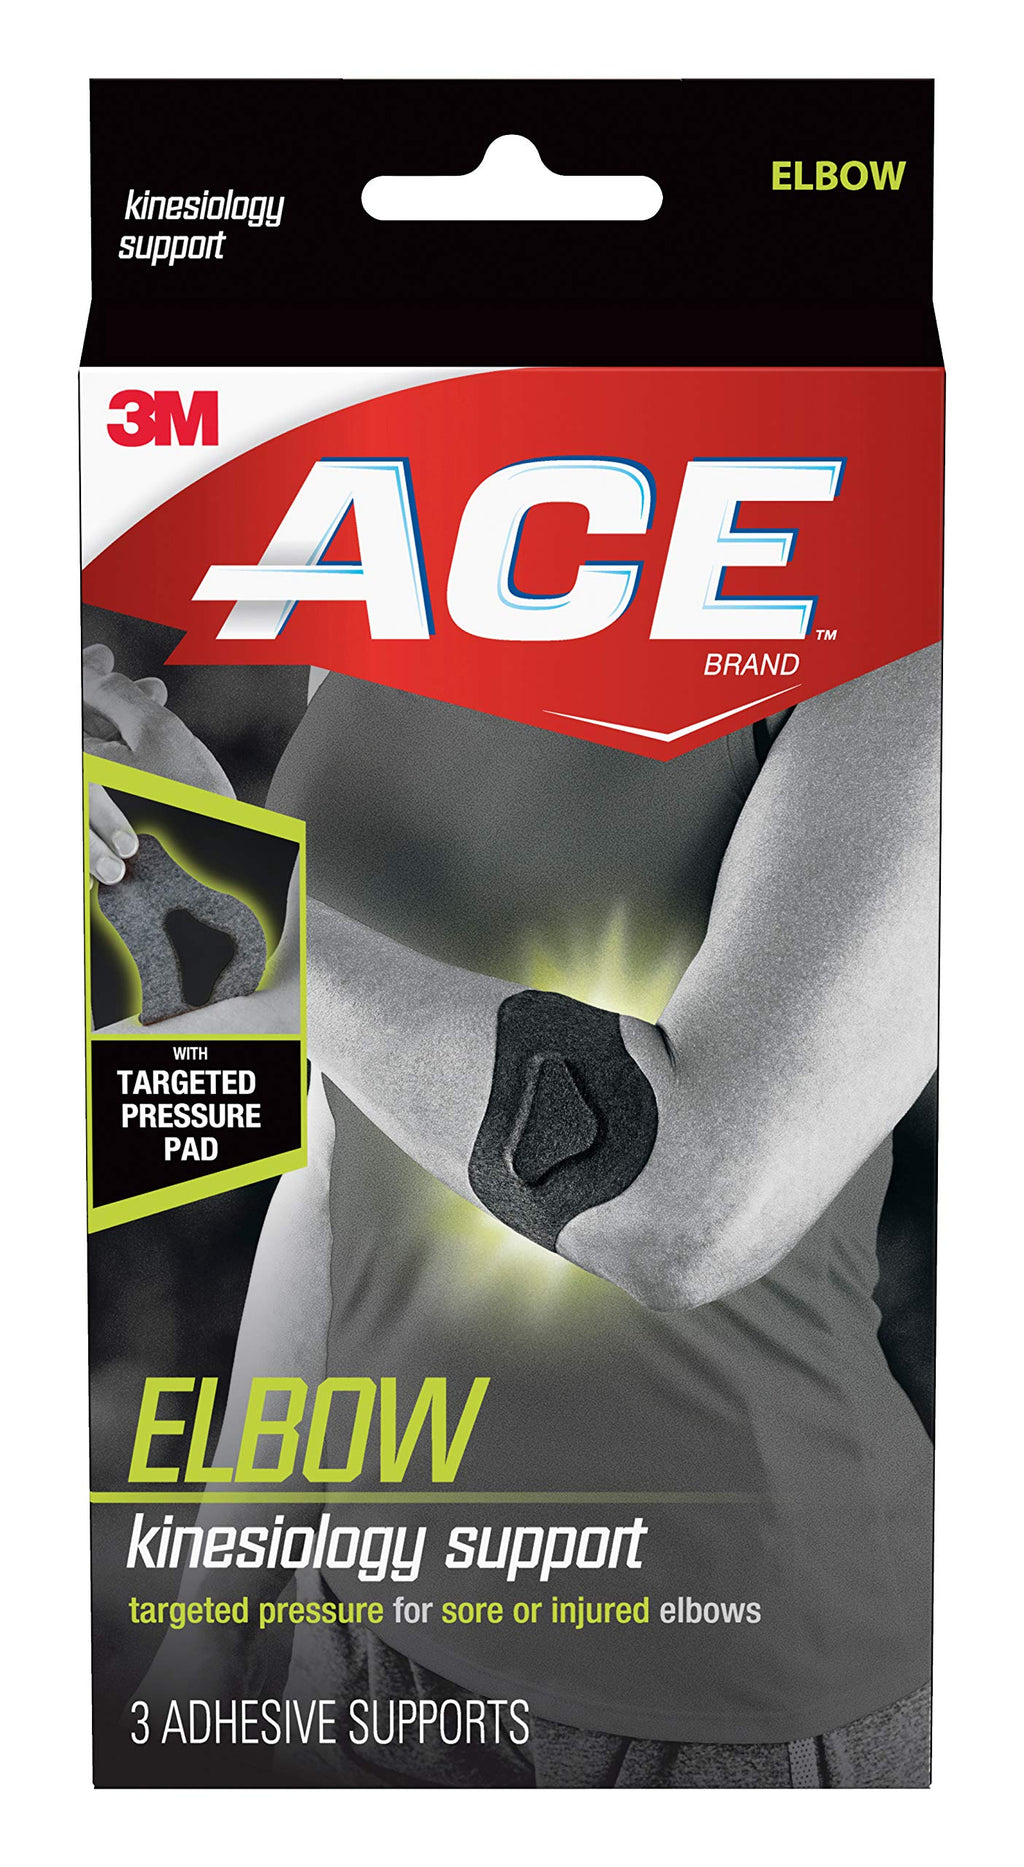 [Australia] - ACE Kinesiology Elbow Support, Flexible Fiber, Pre-Cut Design Contours to Elbow, Breathable, Water-Resistant, May Be Worn for up to Three Days 